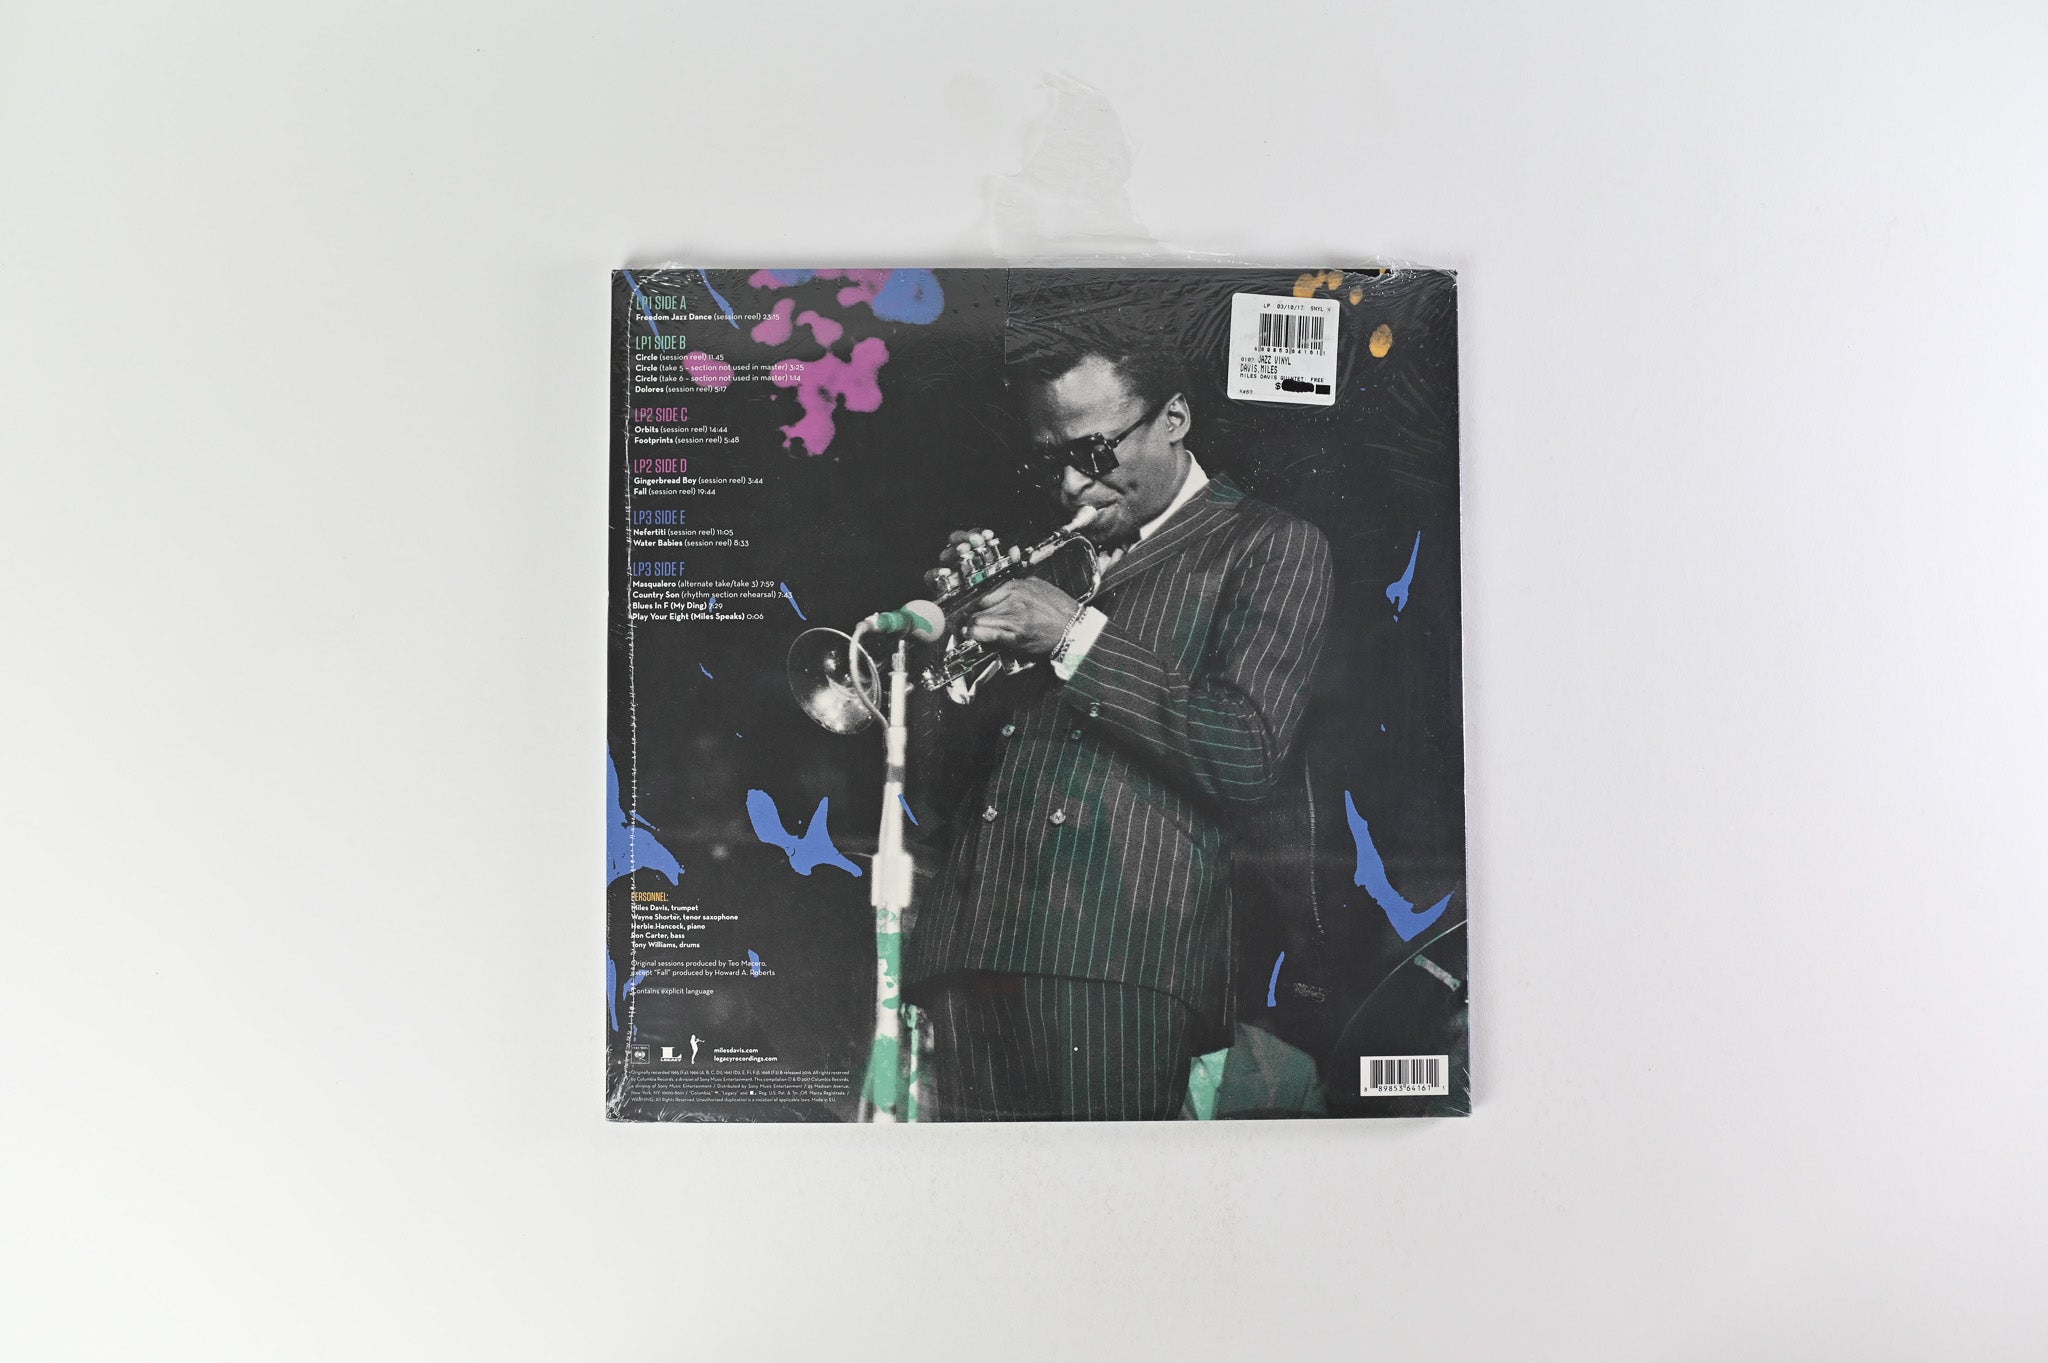 The Miles Davis Quintet - Freedom Jazz Dance (The Bootleg Series Vol. 5) SEALED on Columbia/Legacy